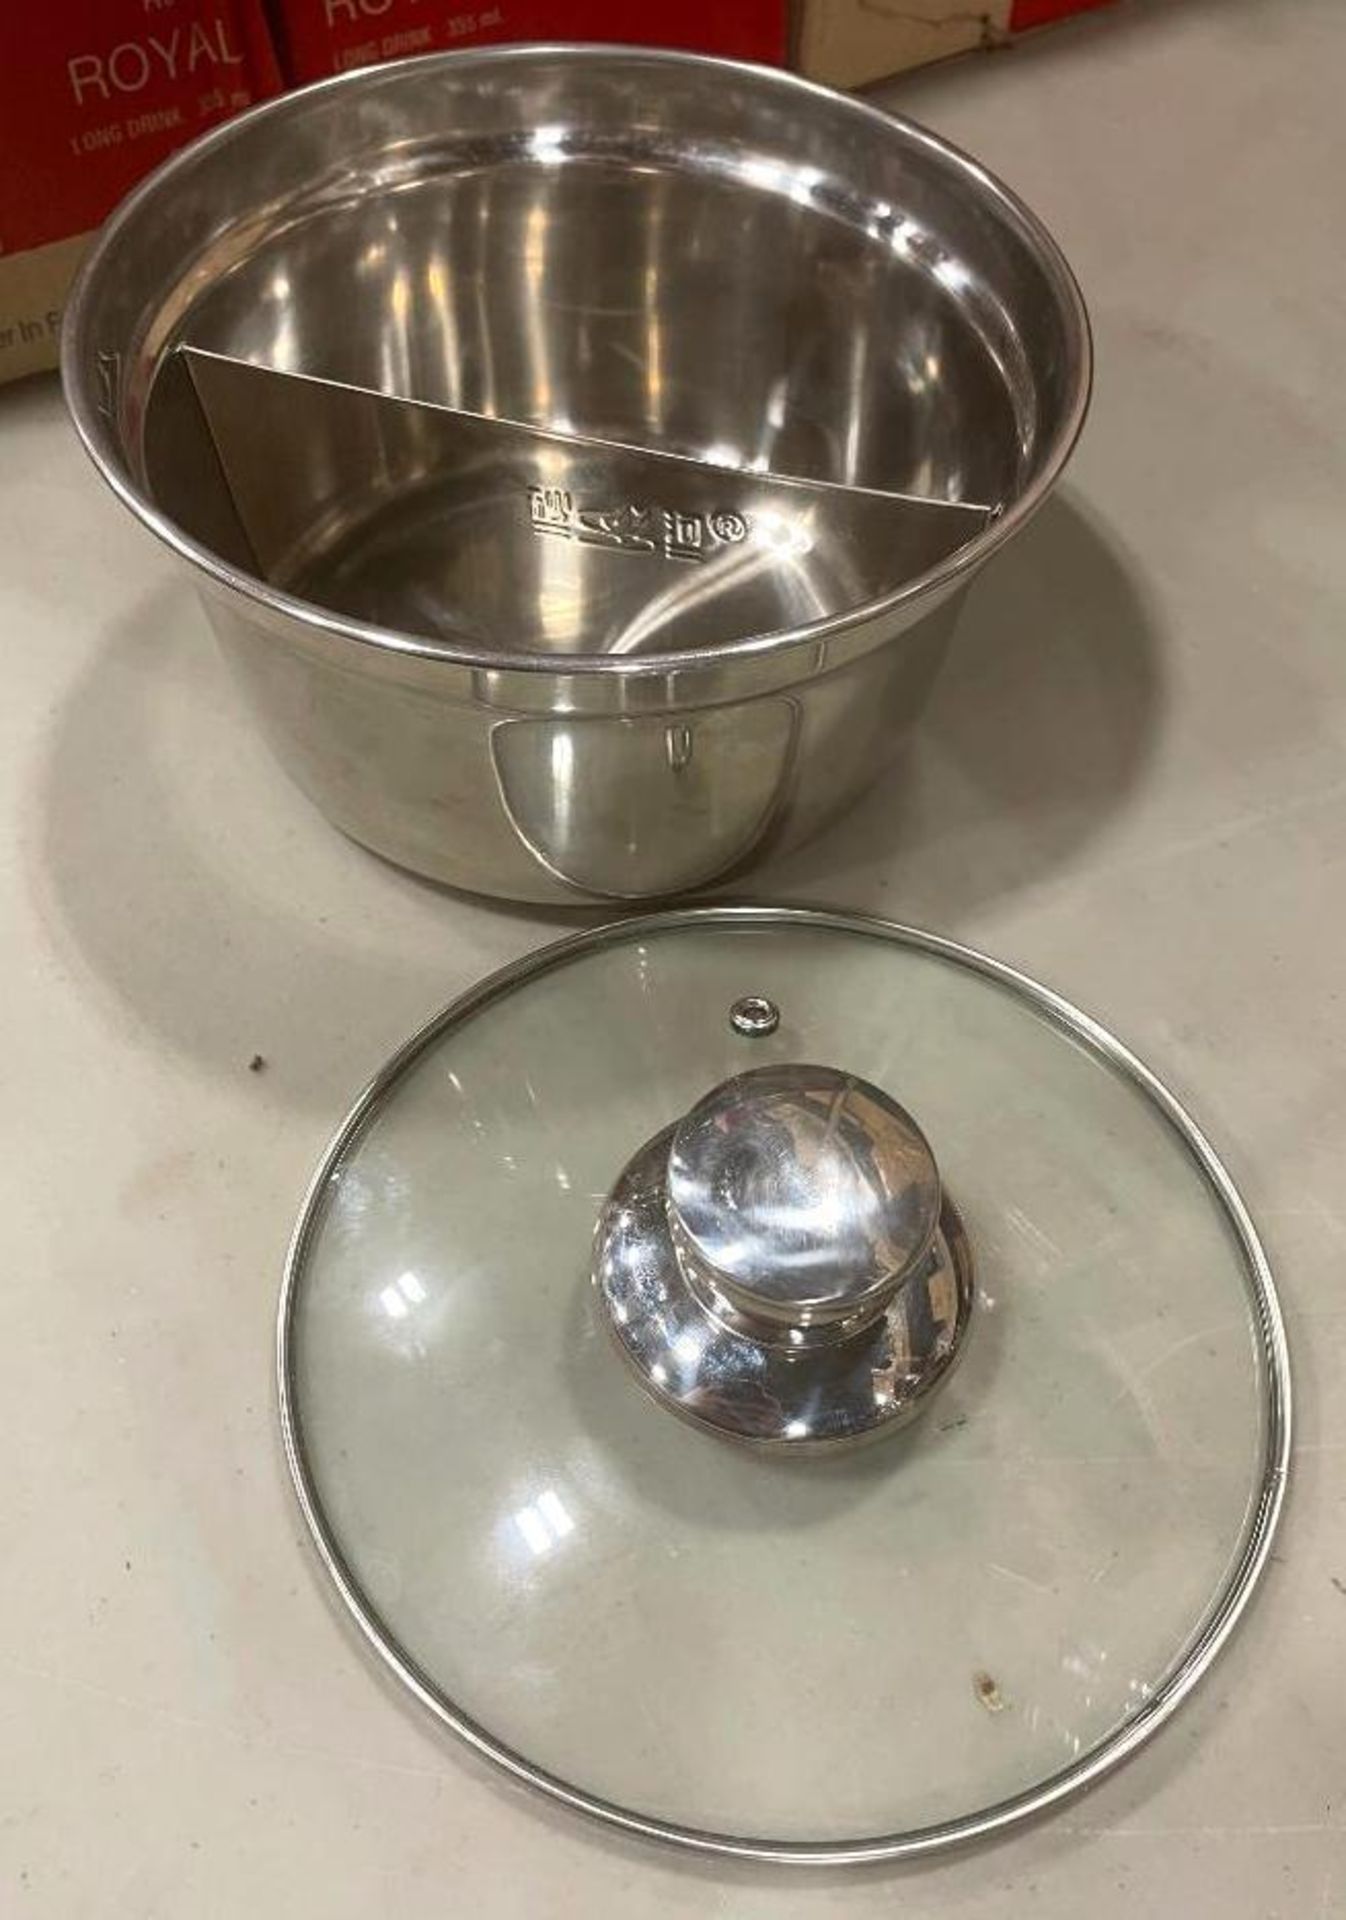 LOT OF (20) TWO-COMPARTMENT ROUND STAINLESS STEEL POT WITH COVER - Image 3 of 7